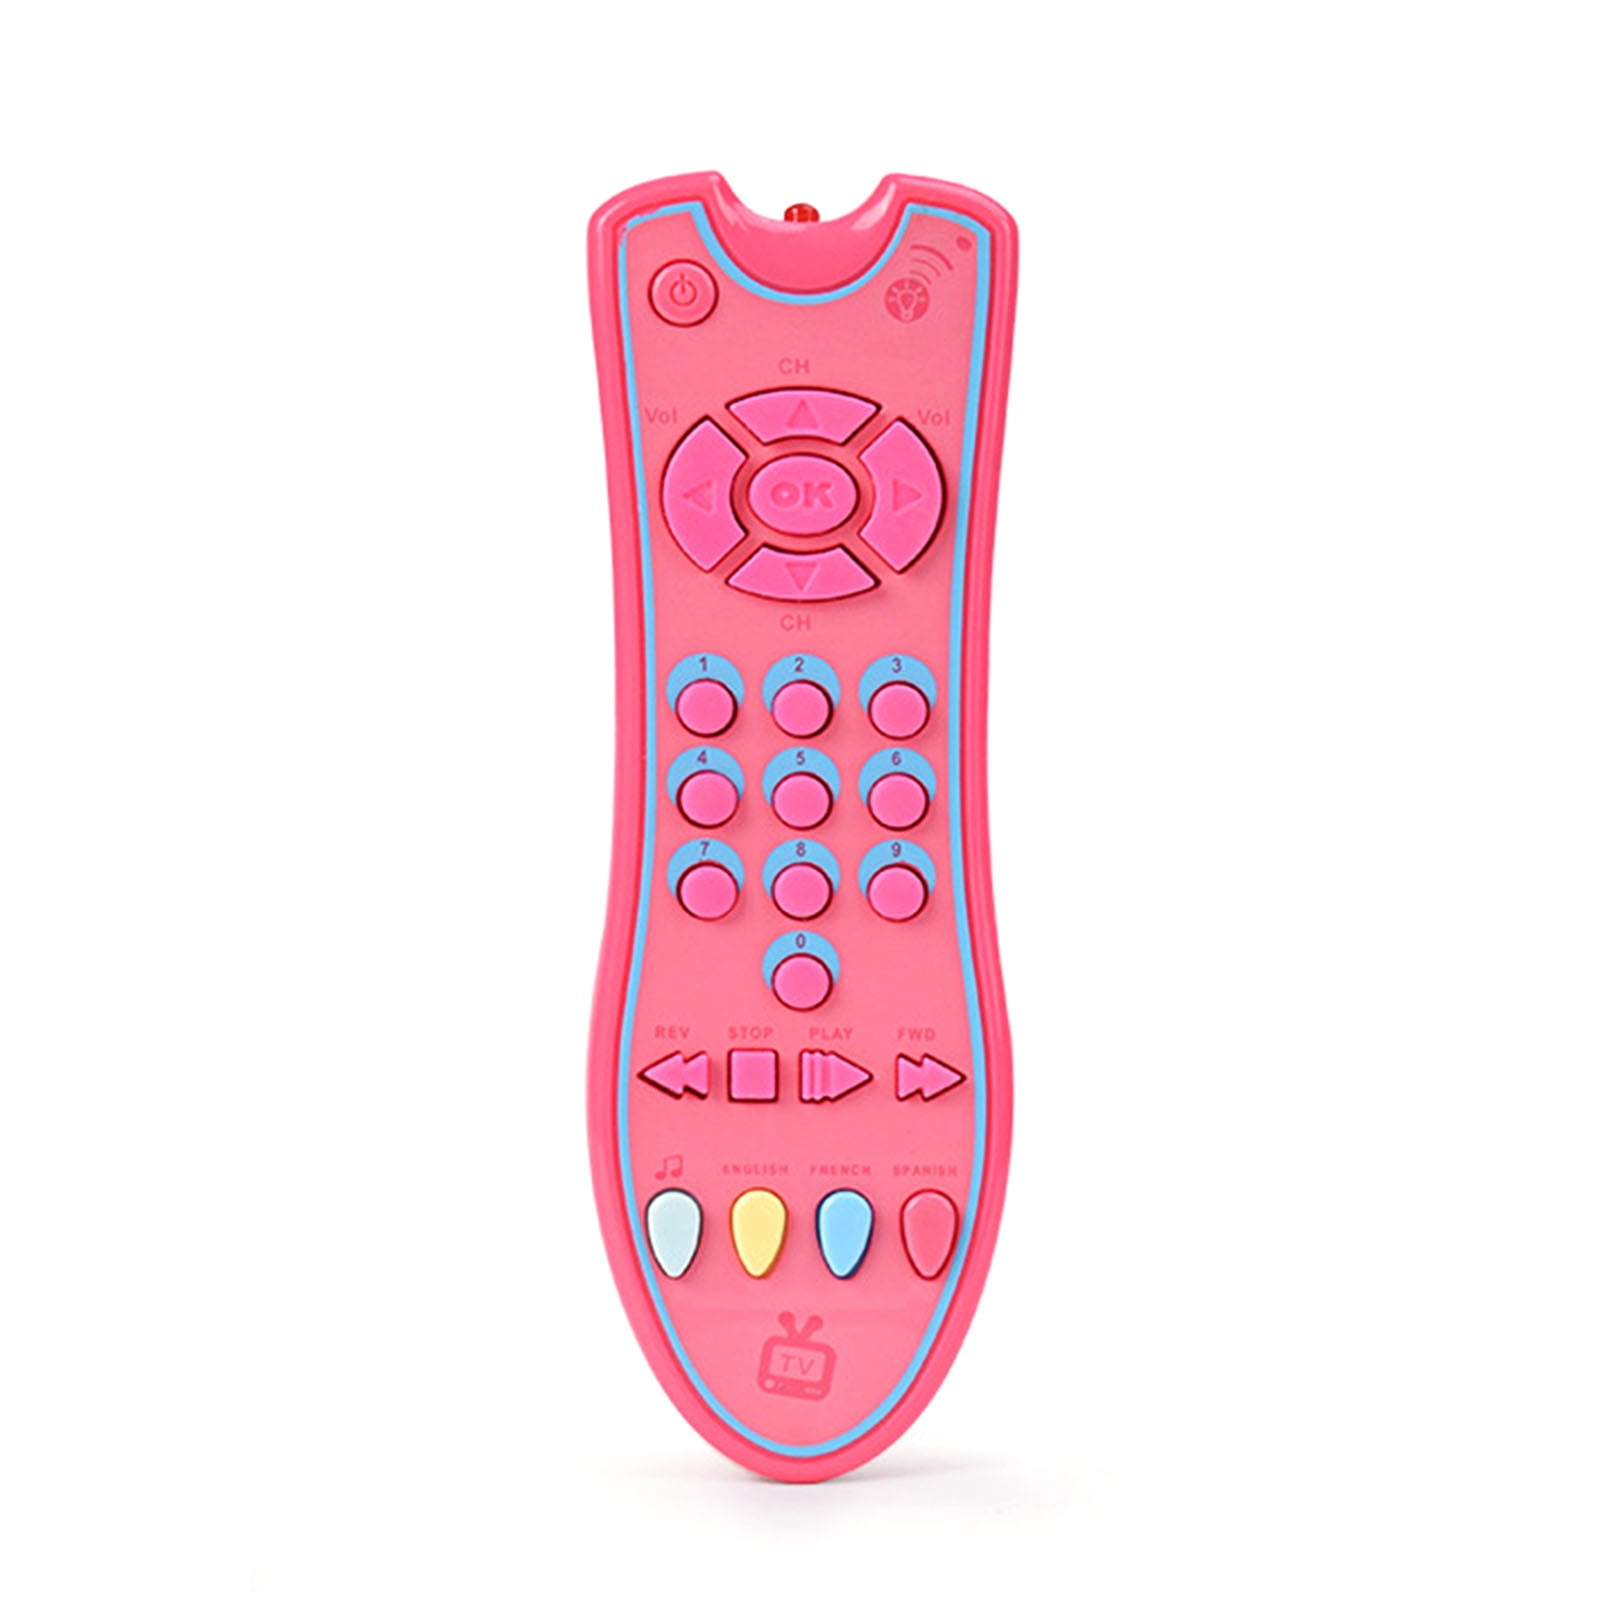 Kids Musical TV Remote Control Toy with Light and Sound Baby Early